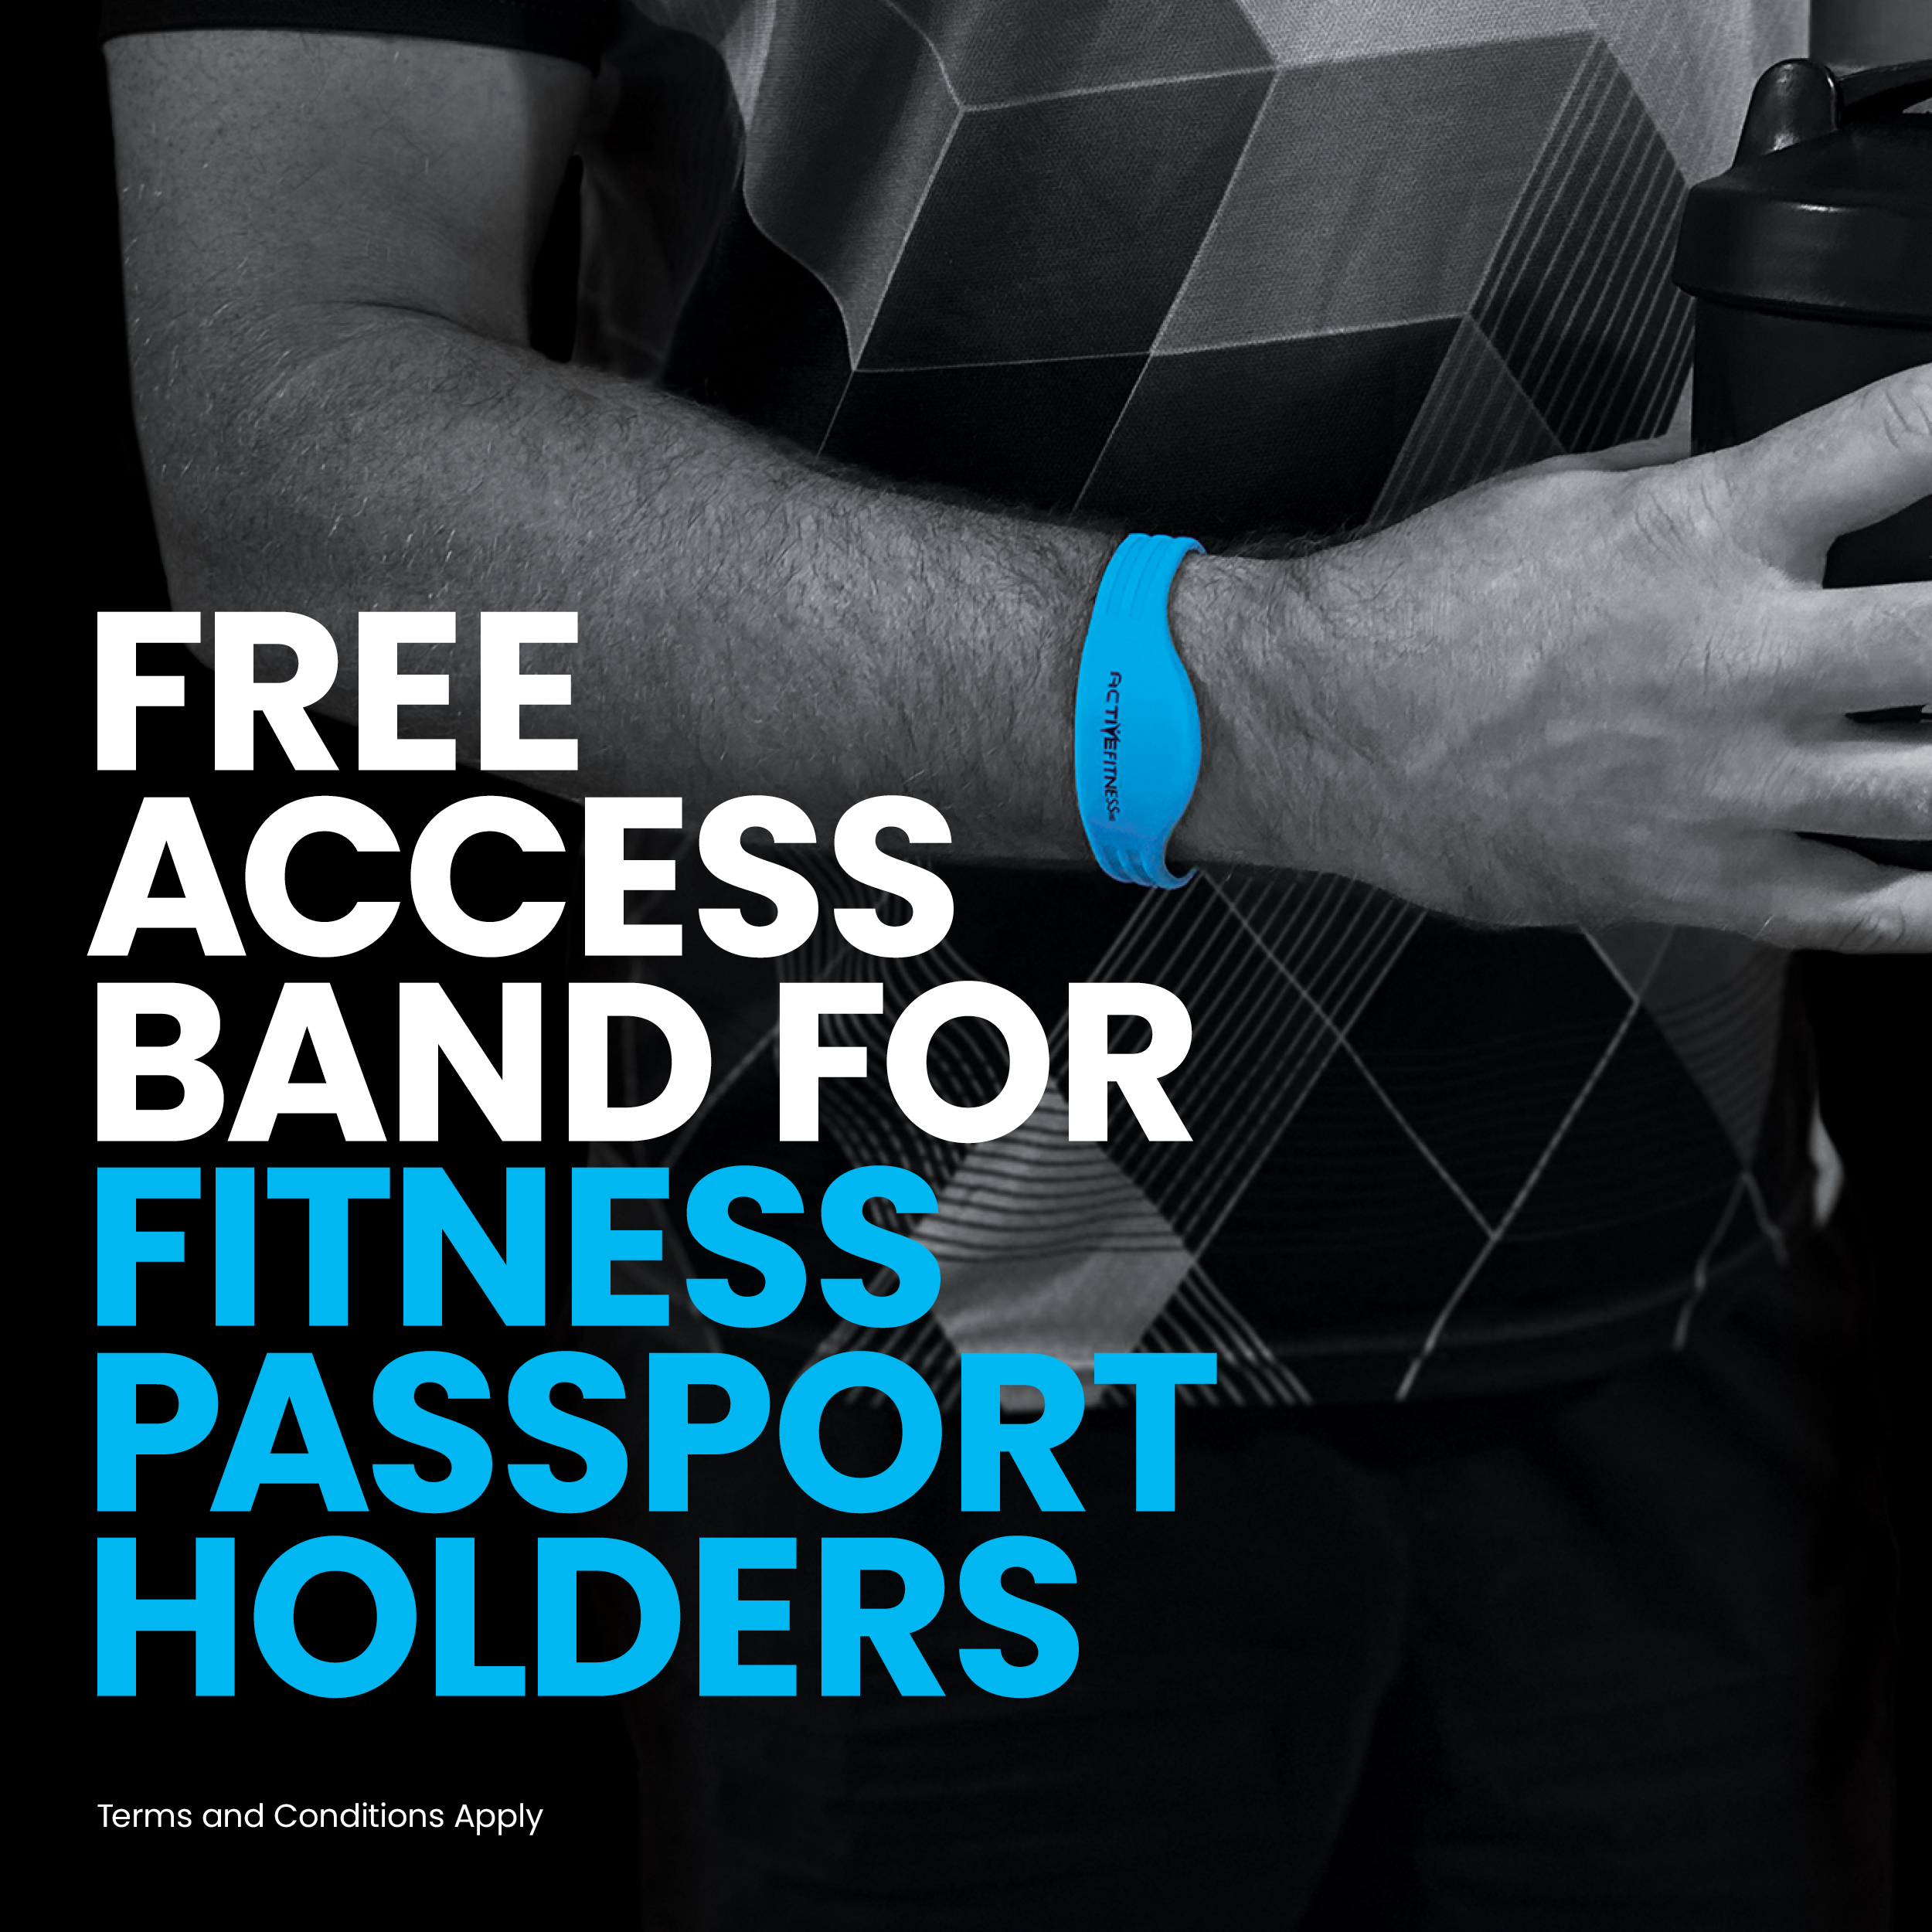 FREE Access Band for Fitness Passport holders